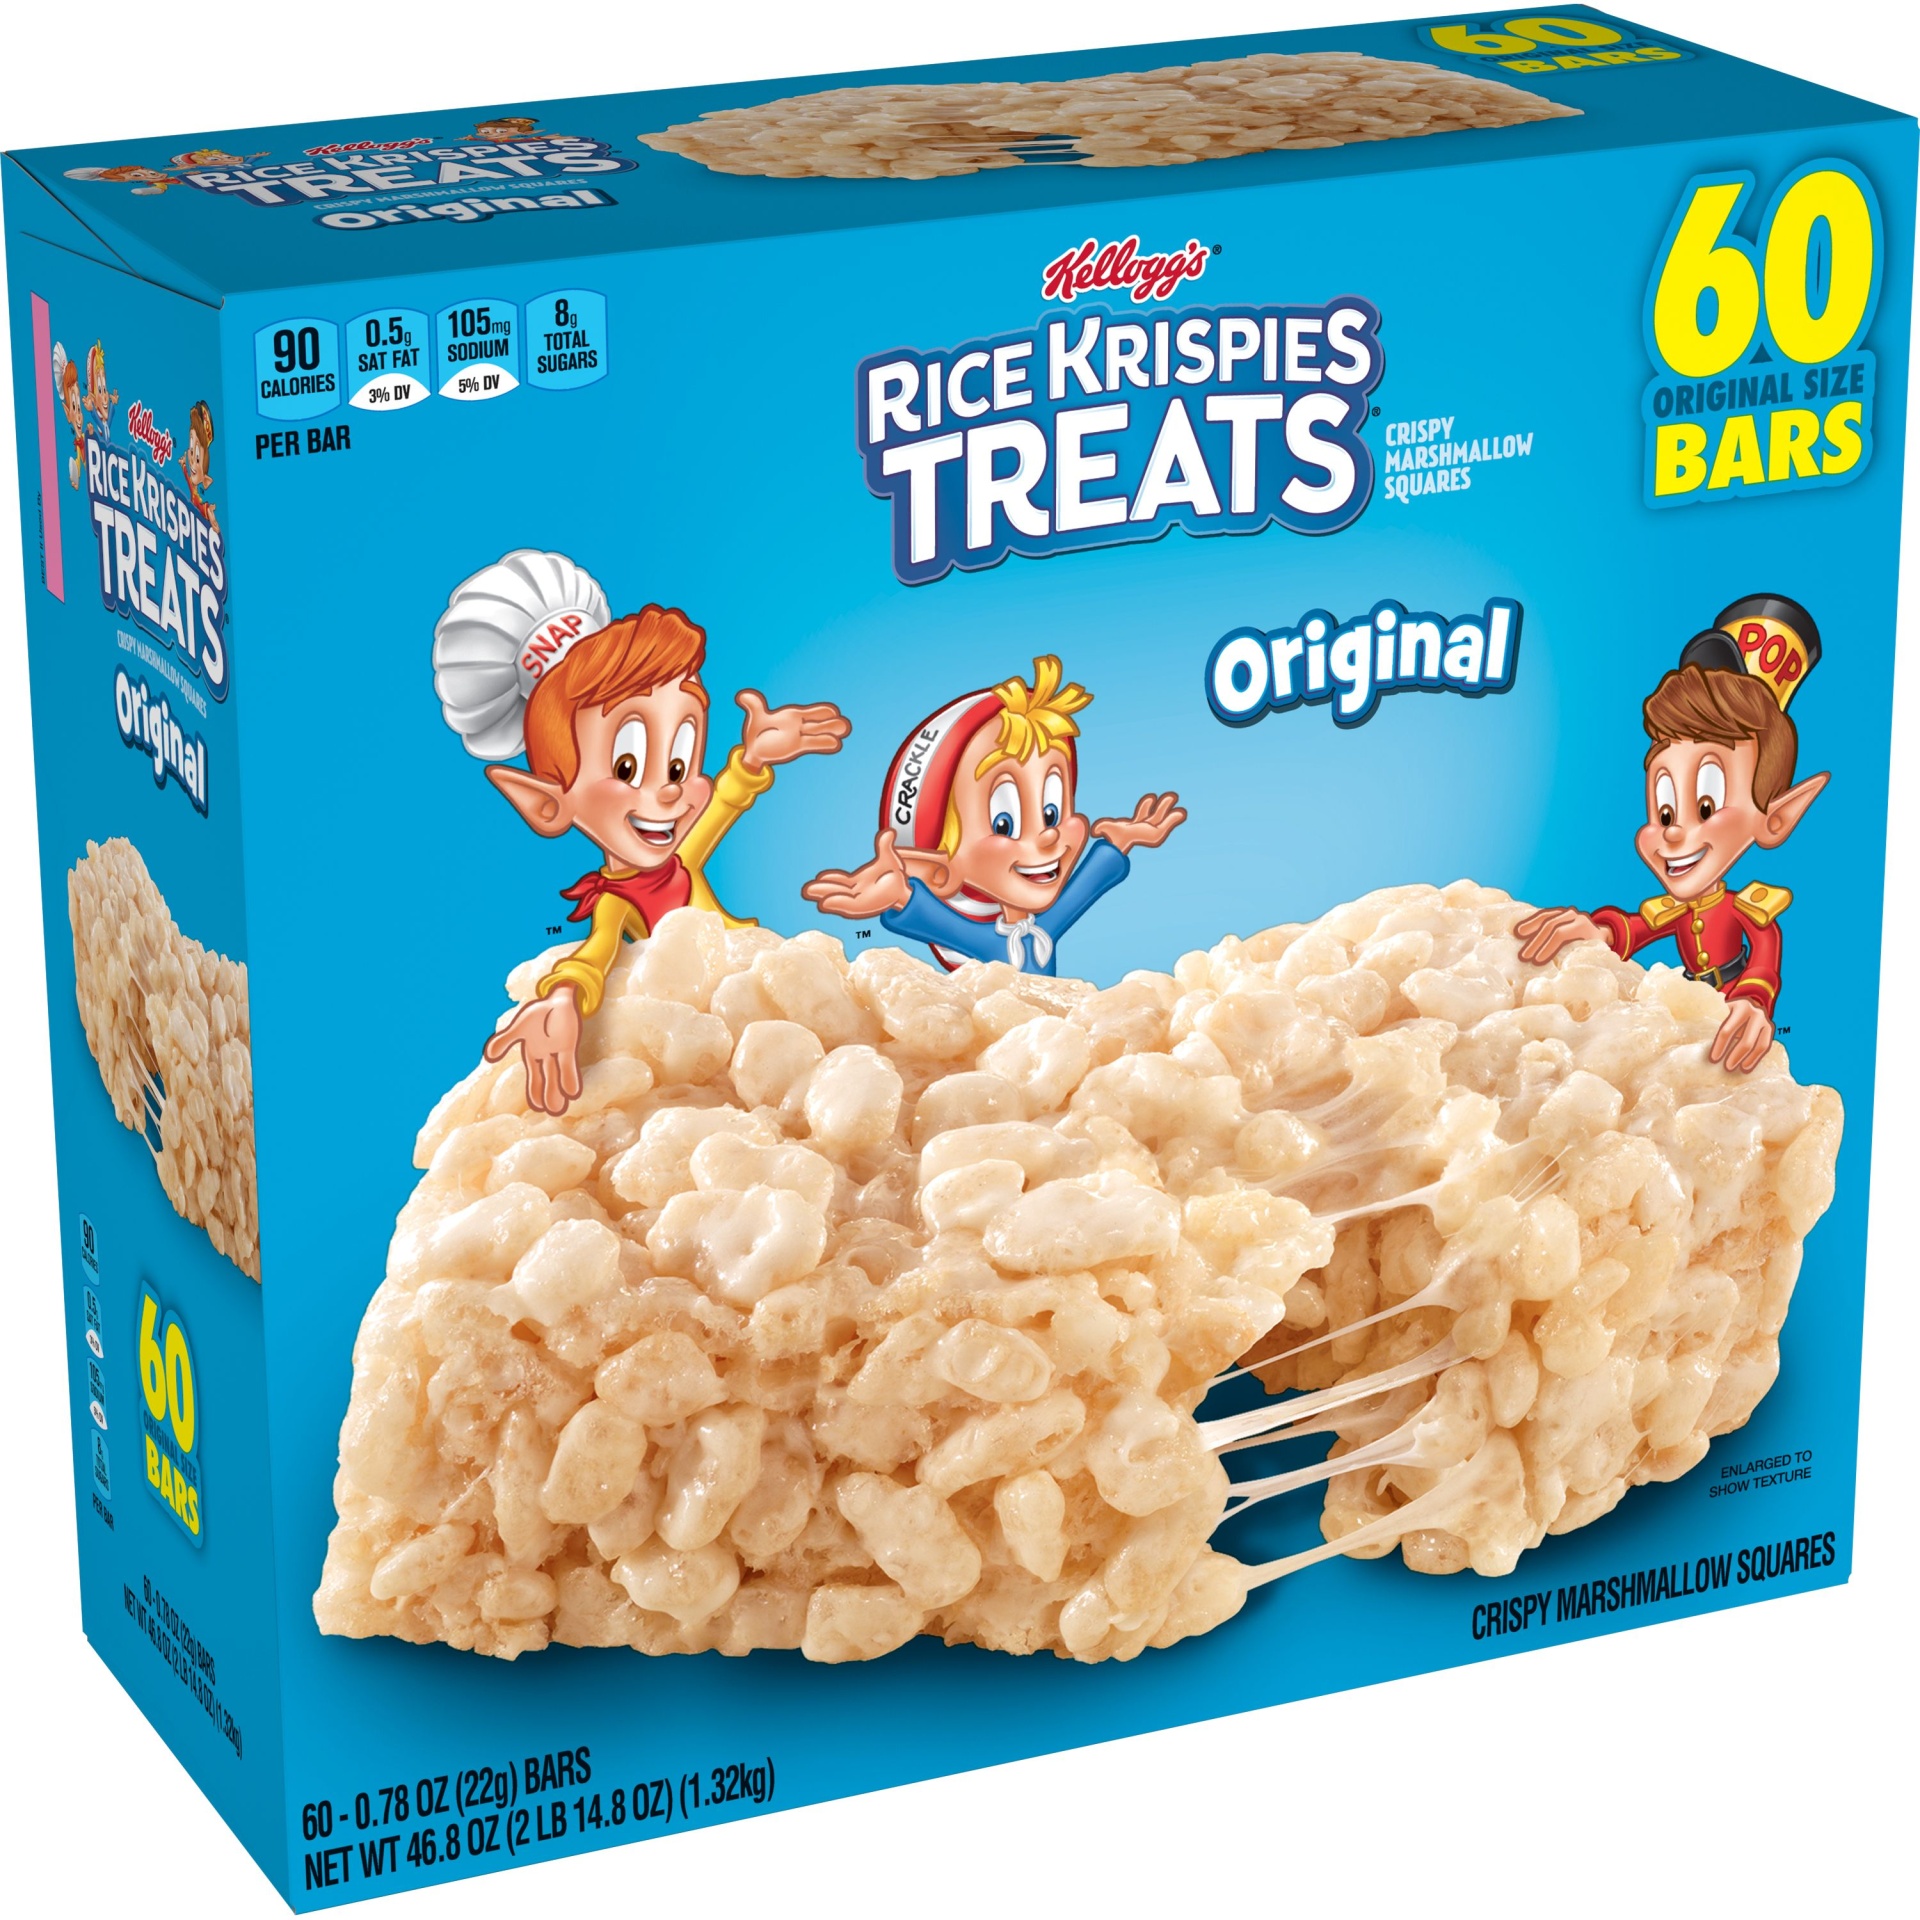 are rice krispies a healthy snack